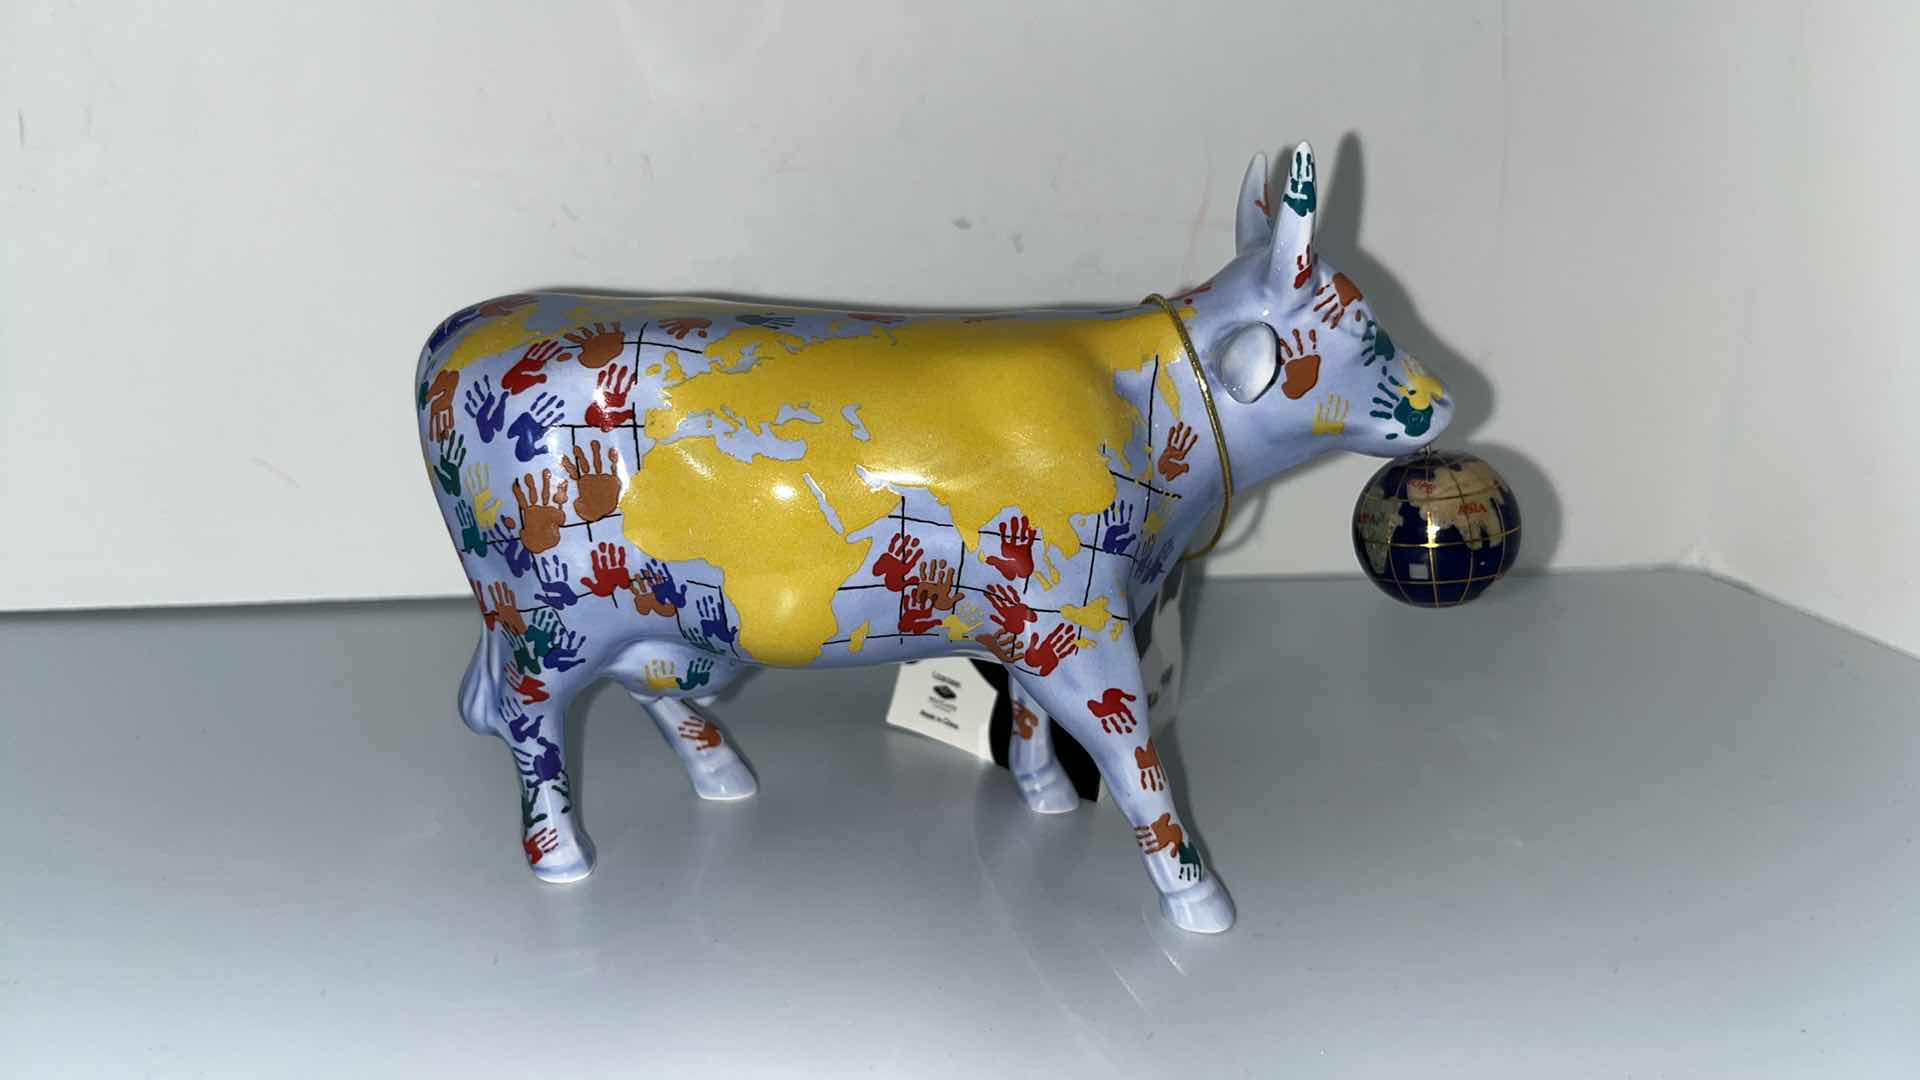 Photo 2 of WESTLAND GIFTWARE COW PARADE IT’S A SMOOLL WORLD FIGURINE 2002 (7312)